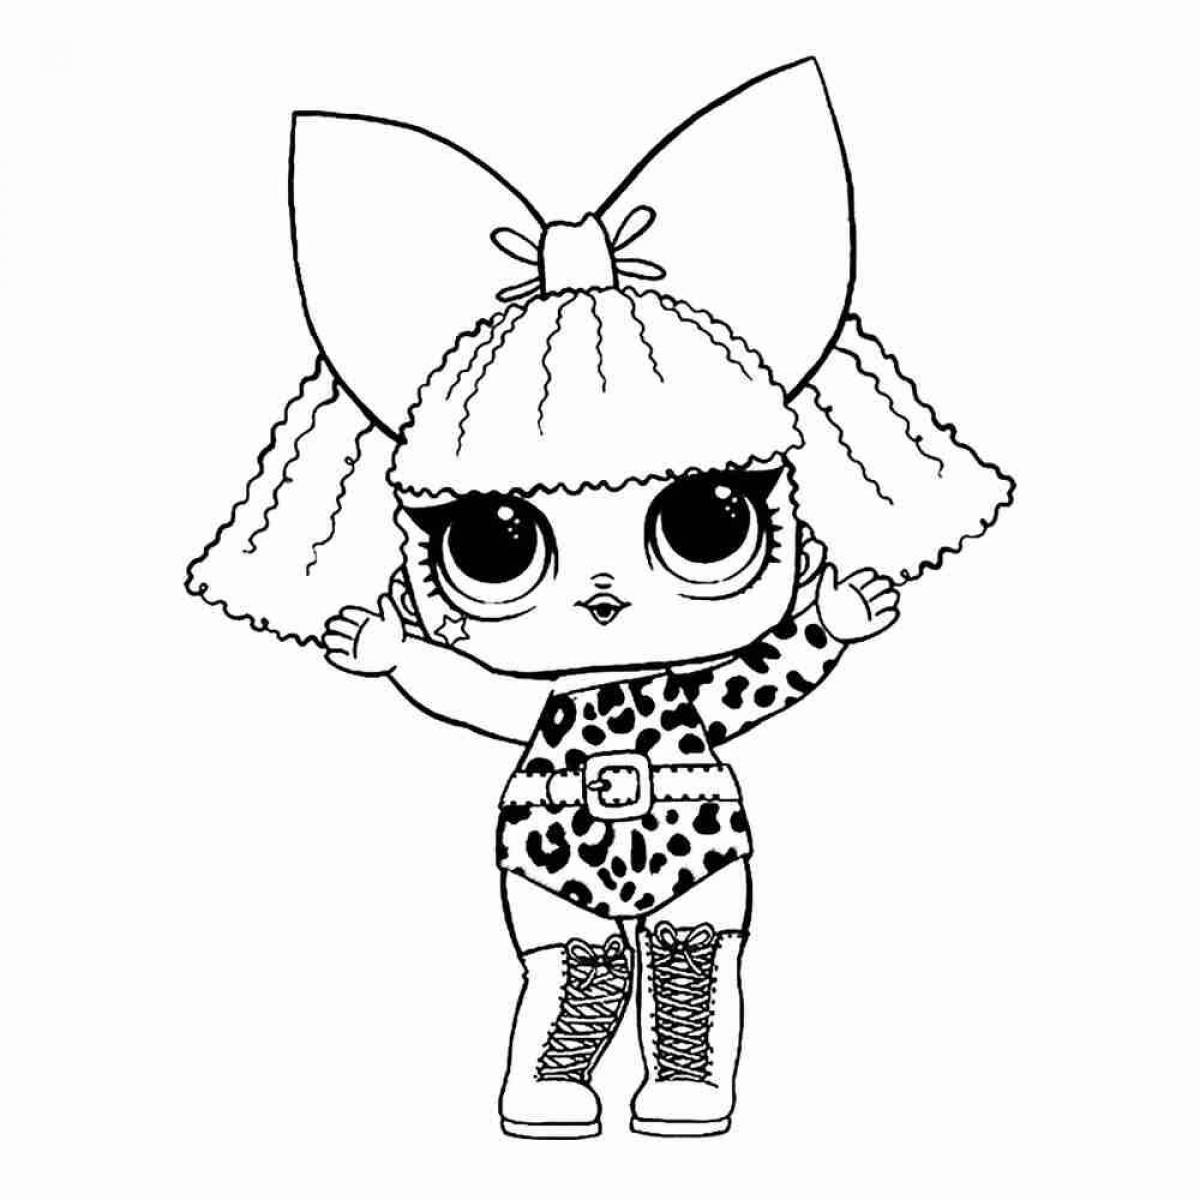 Lola hypnotic dolls coloring pages for kids